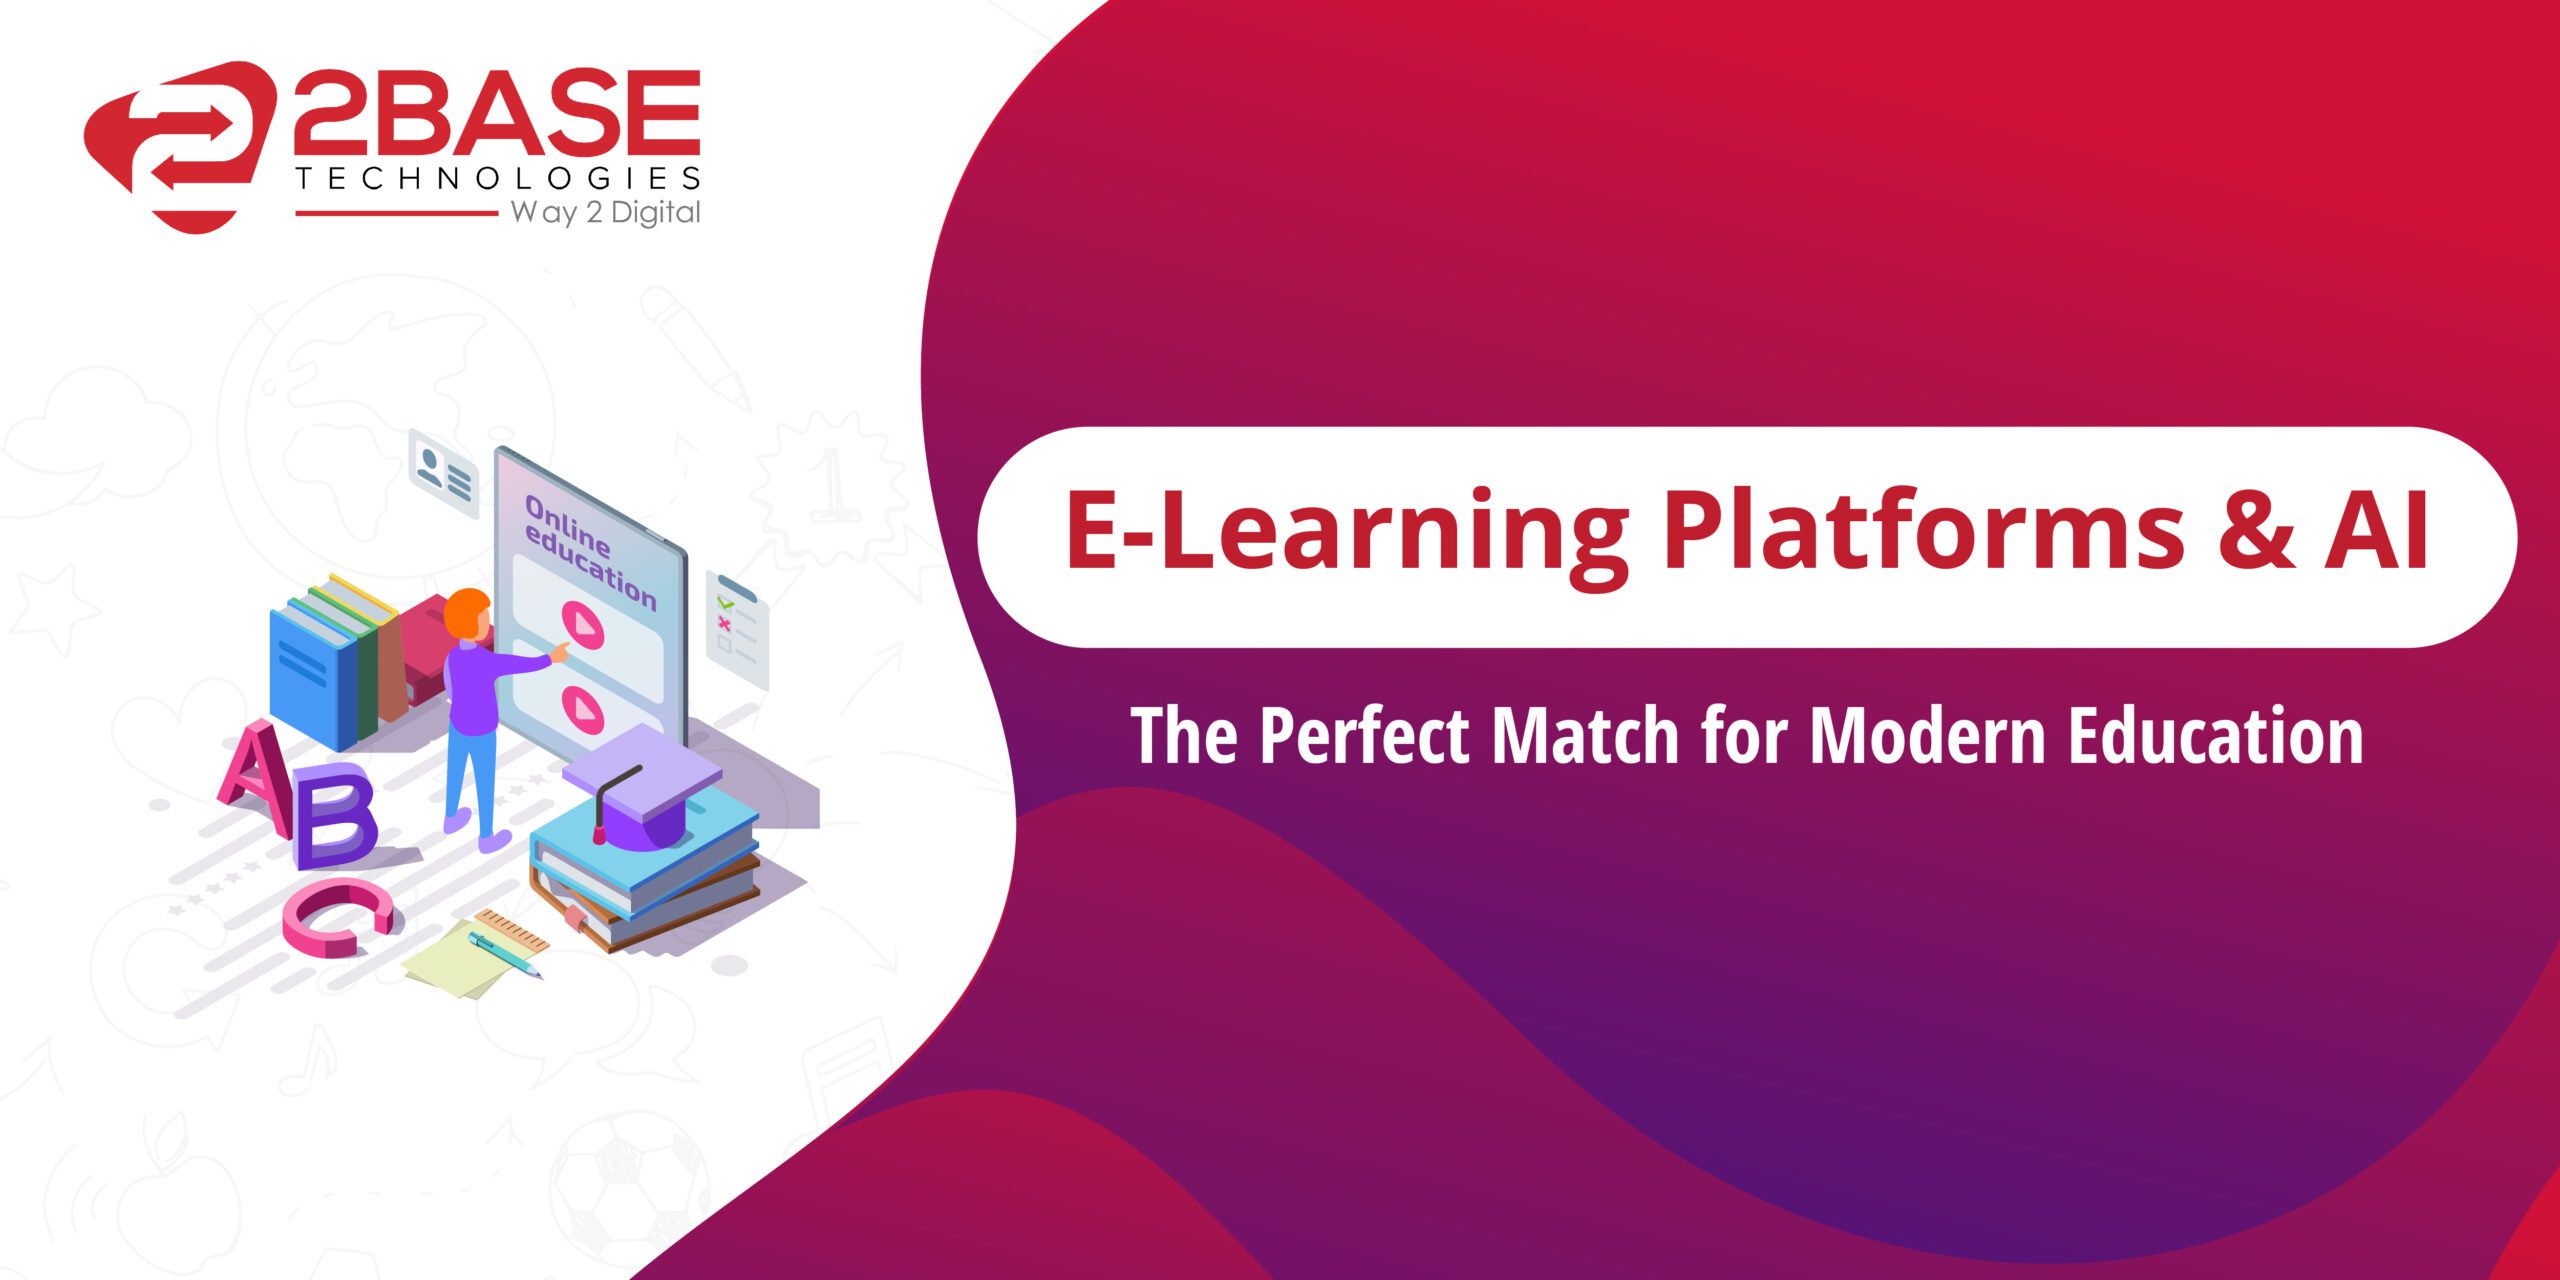 E-Learning Platforms and AI: The Perfect Match for Modern Education